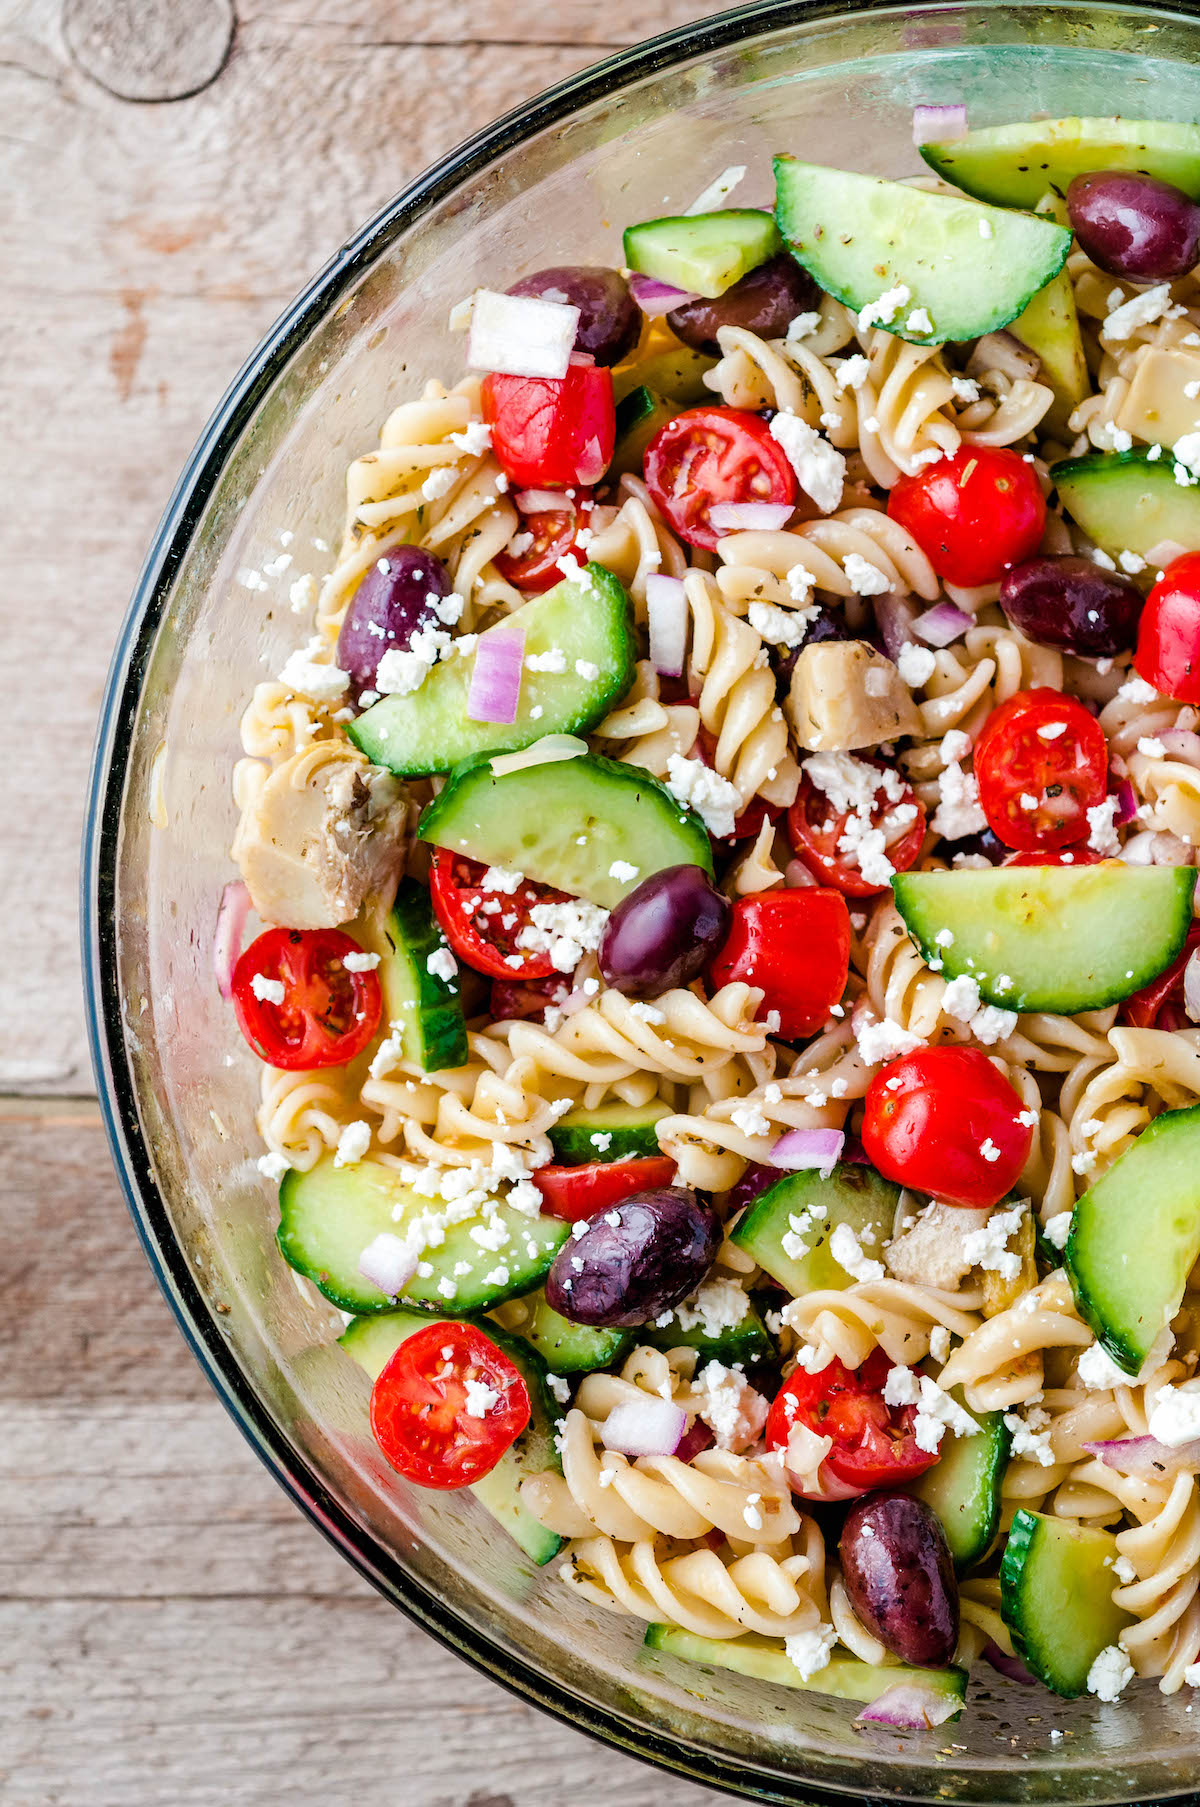 Overhead image of greek pasta salad with feta and olives in a clear glass bowl.